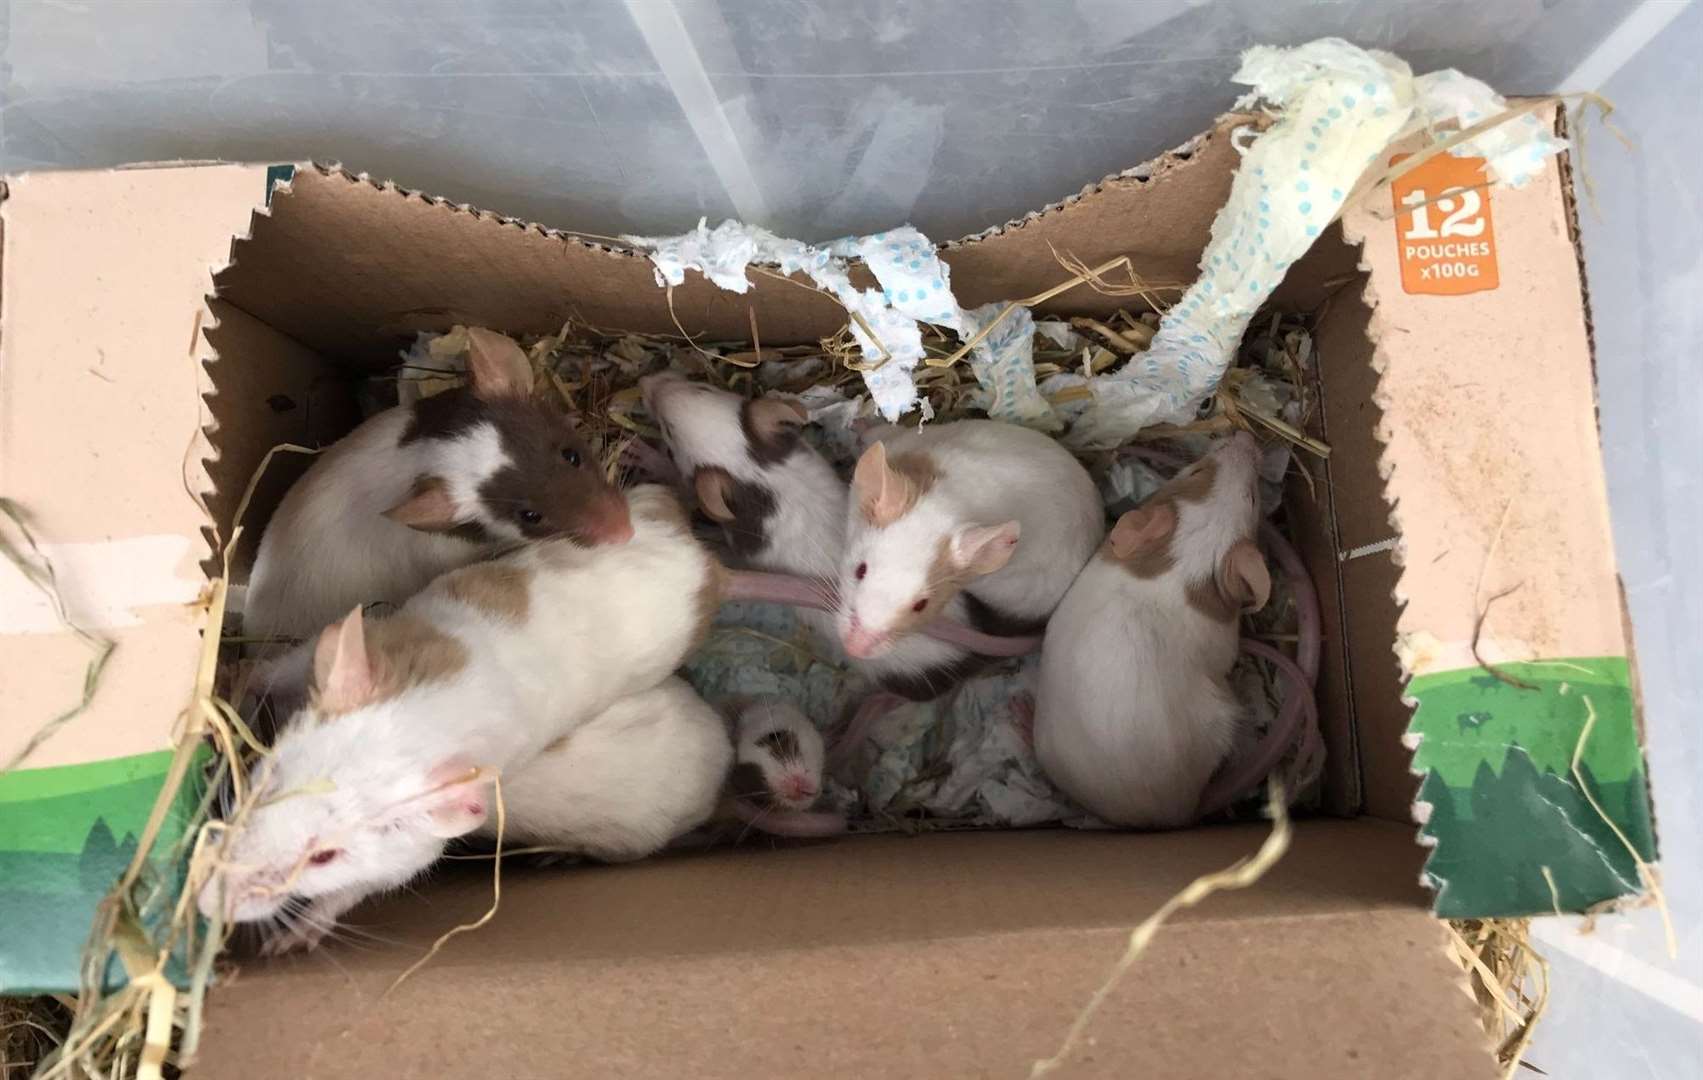 Nineteen mice were found abandoned in a box in Maidstone. Picture: RSPCA